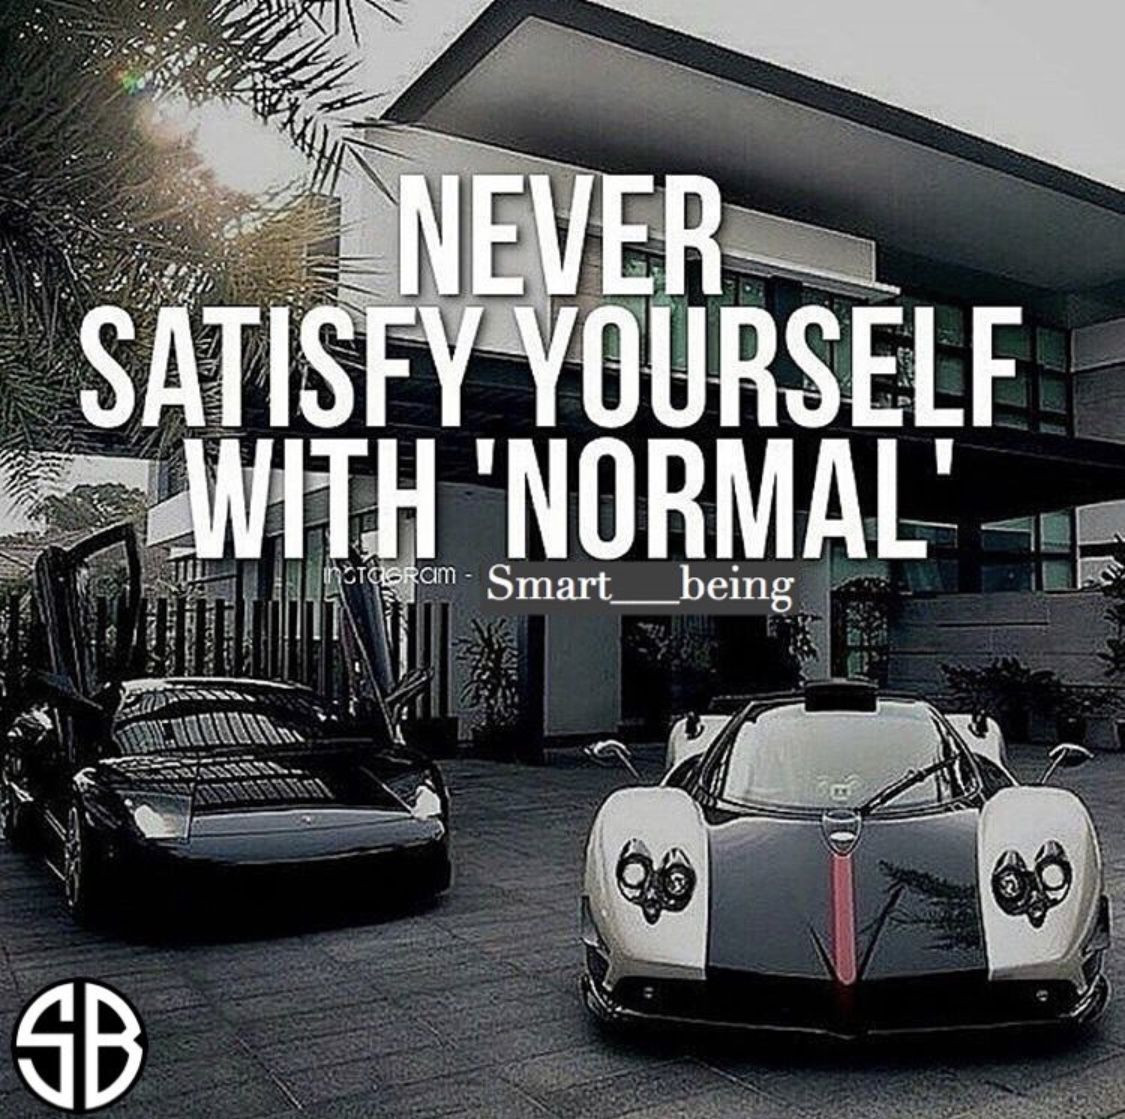 Luxury Cars With Motivational Quotes Images
 Quotes rich quotes motivational wealthy billionaire